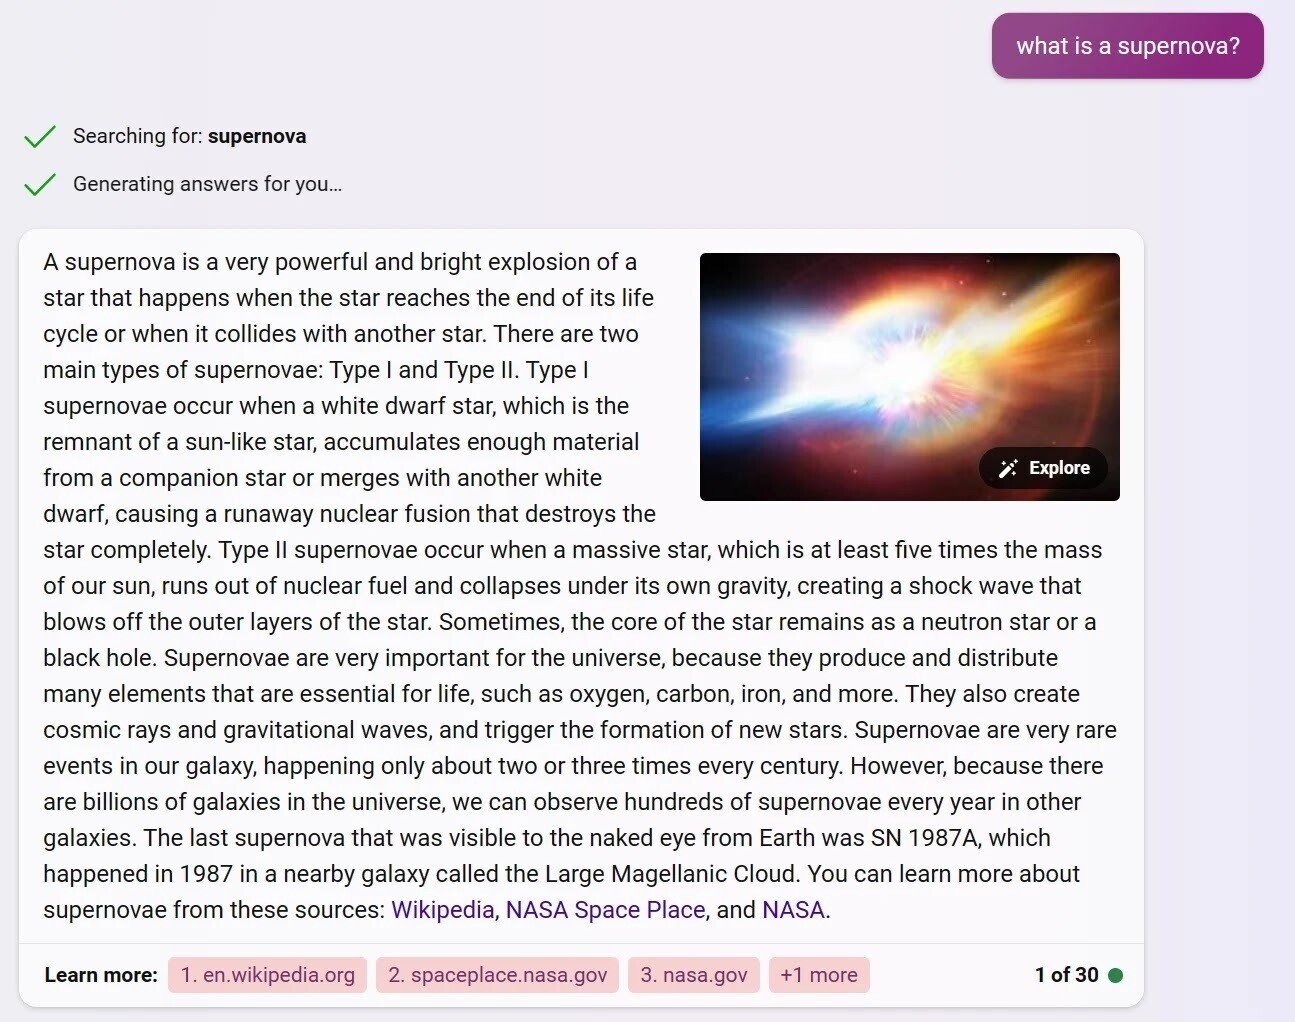 “More Creative” Bing Chat response for "what is a supernova" search query